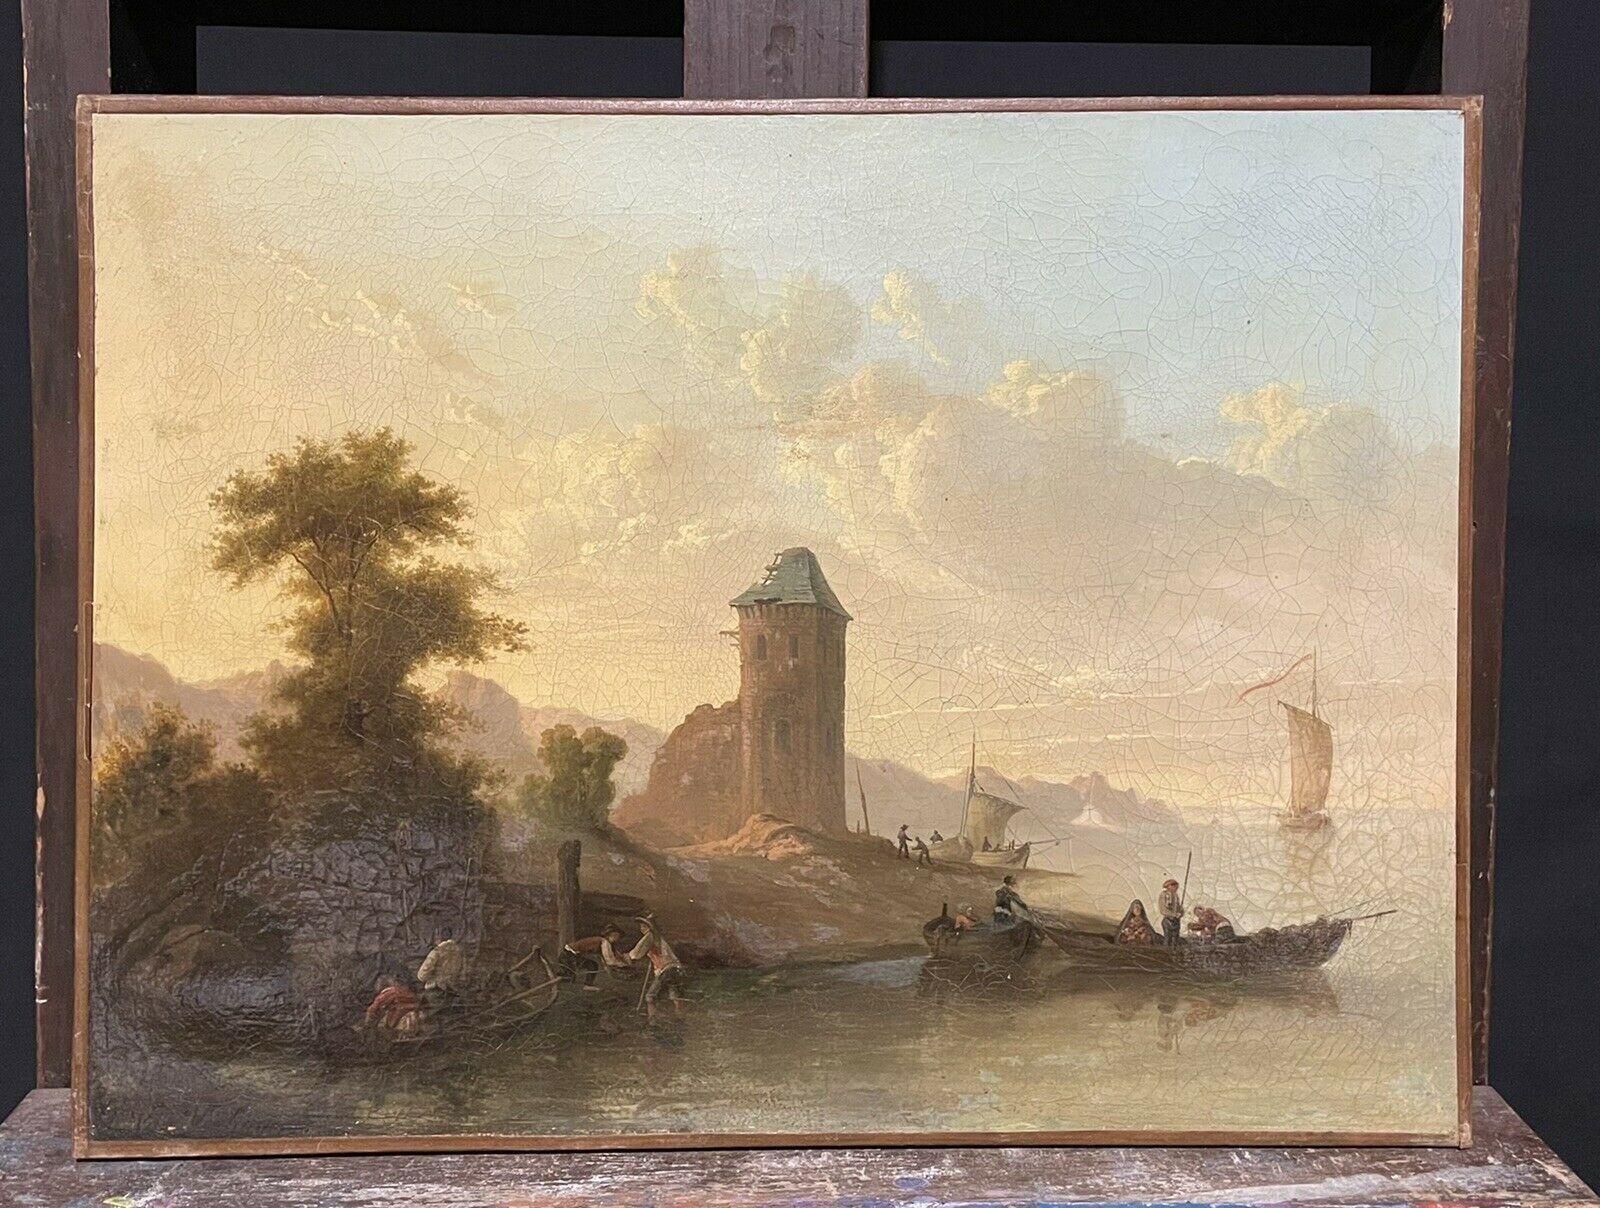 18th/19th C. SIGNED EUROPEAN OIL PAINTING ON CANVAS - MERCHANT PORT AT SUNSET - Painting by Continental School